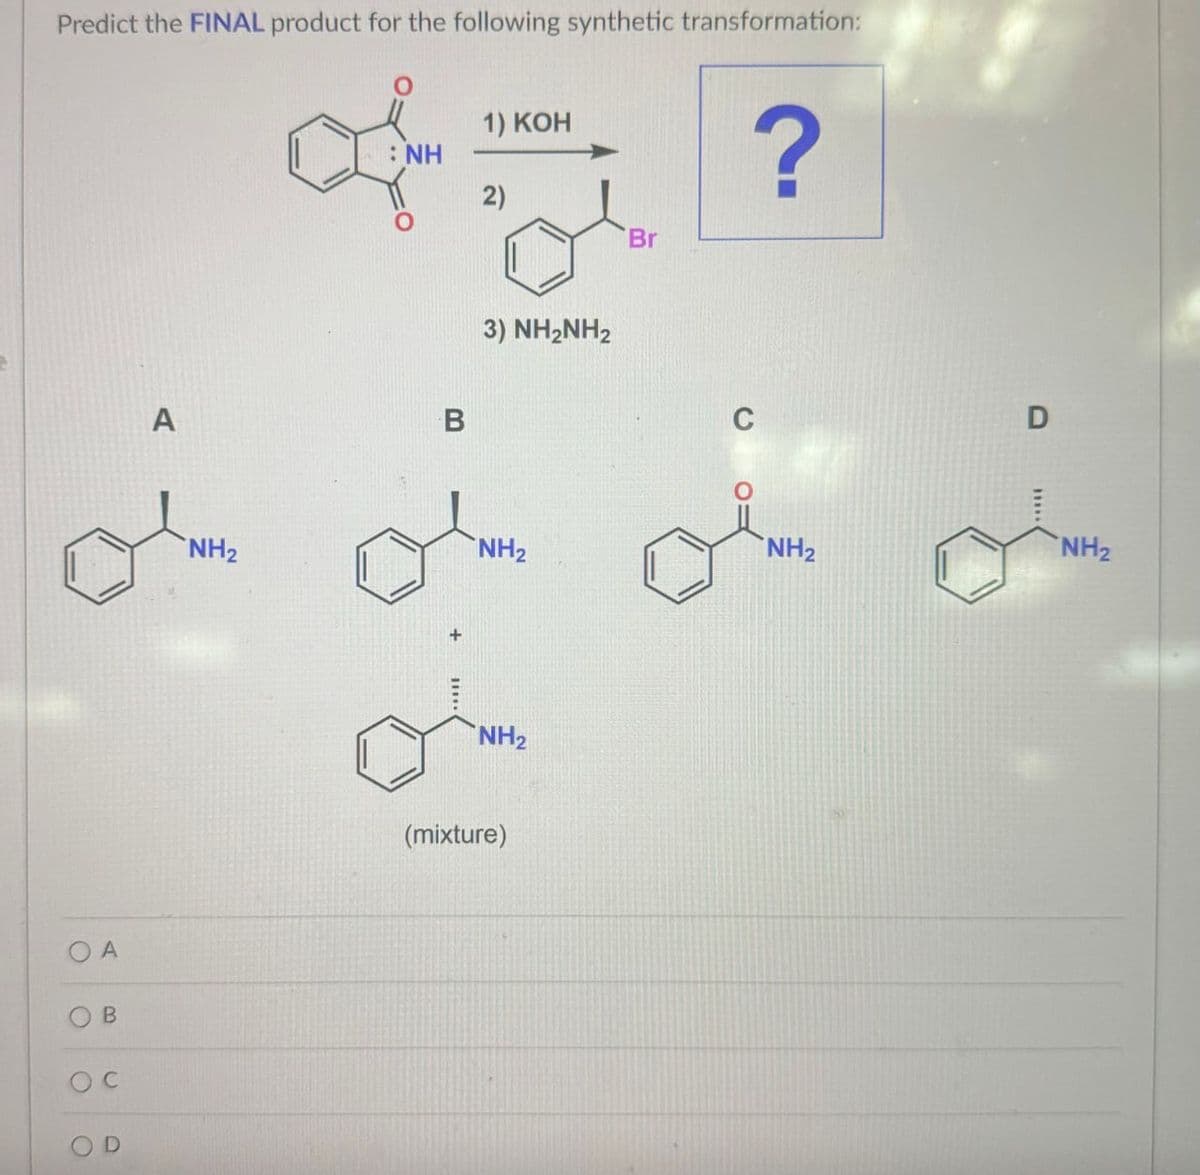 C
Predict the FINAL product for the following synthetic transformation:
: NH
of
1) KOH
2)
Br
?
A
B
oc
A
B
NH2
+
3) NH2NH2
C
D
NH2
NH2
NH2
NH2
(mixture)